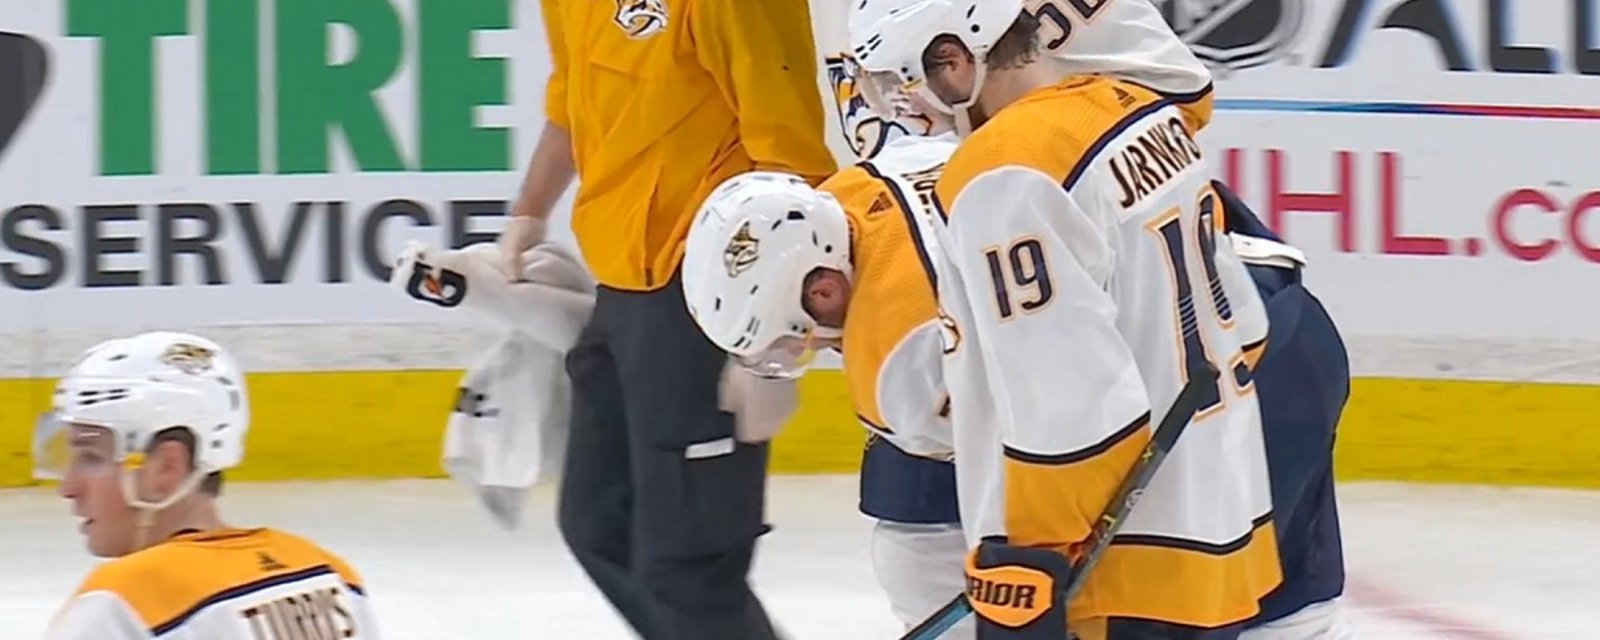 Weber carried off the ice after knee on knee from Bruins' Kuraly.